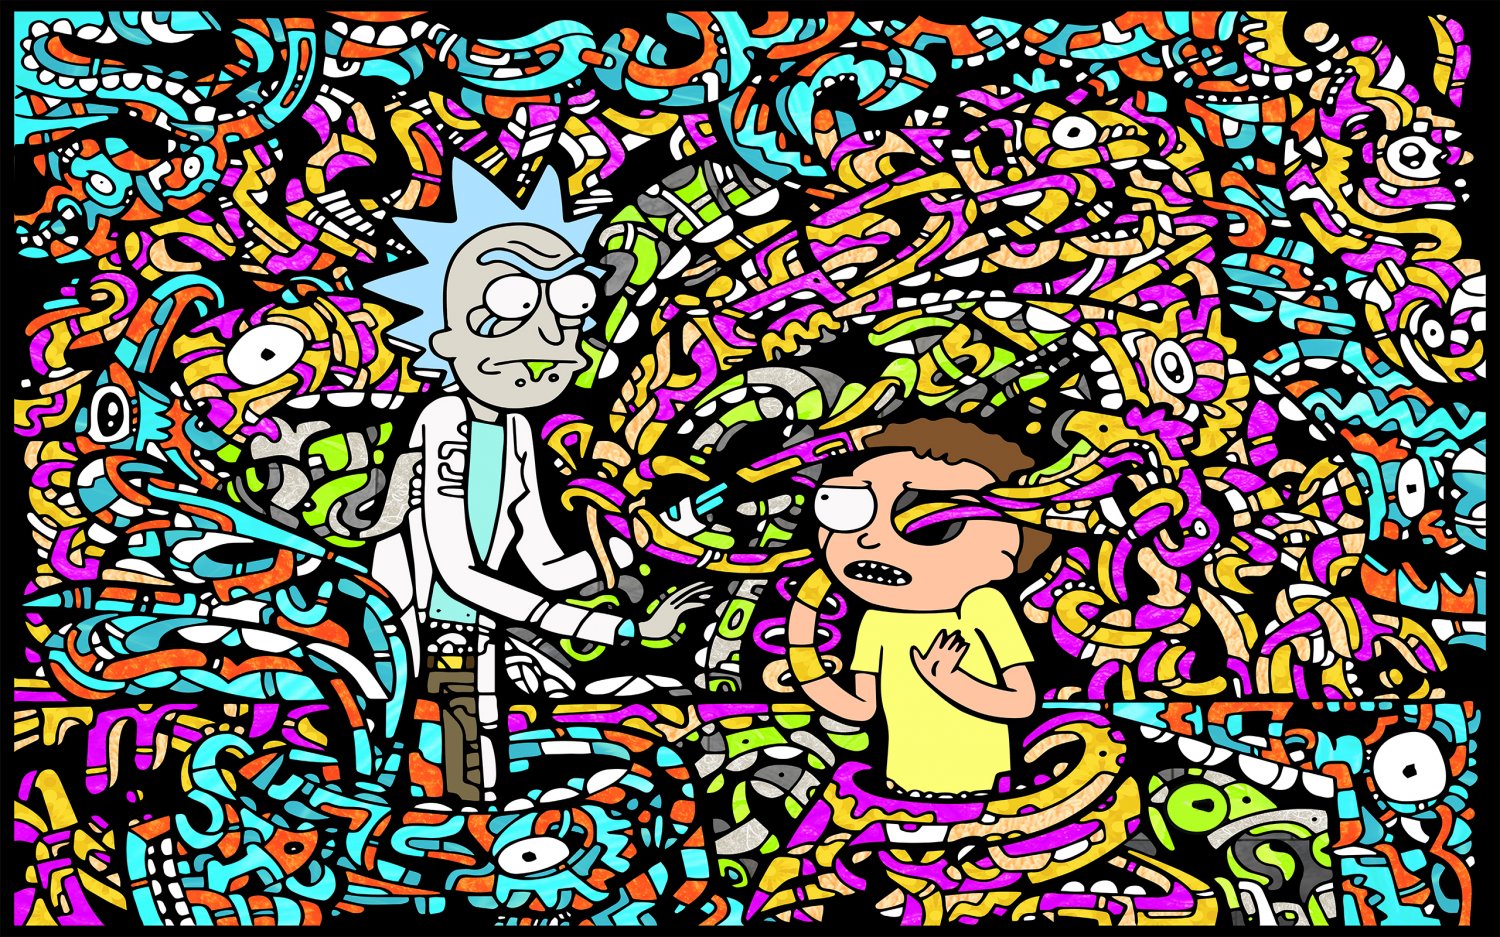 Rick and Morty  13"x19" (32cm/49cm) Polyester Fabric Poster